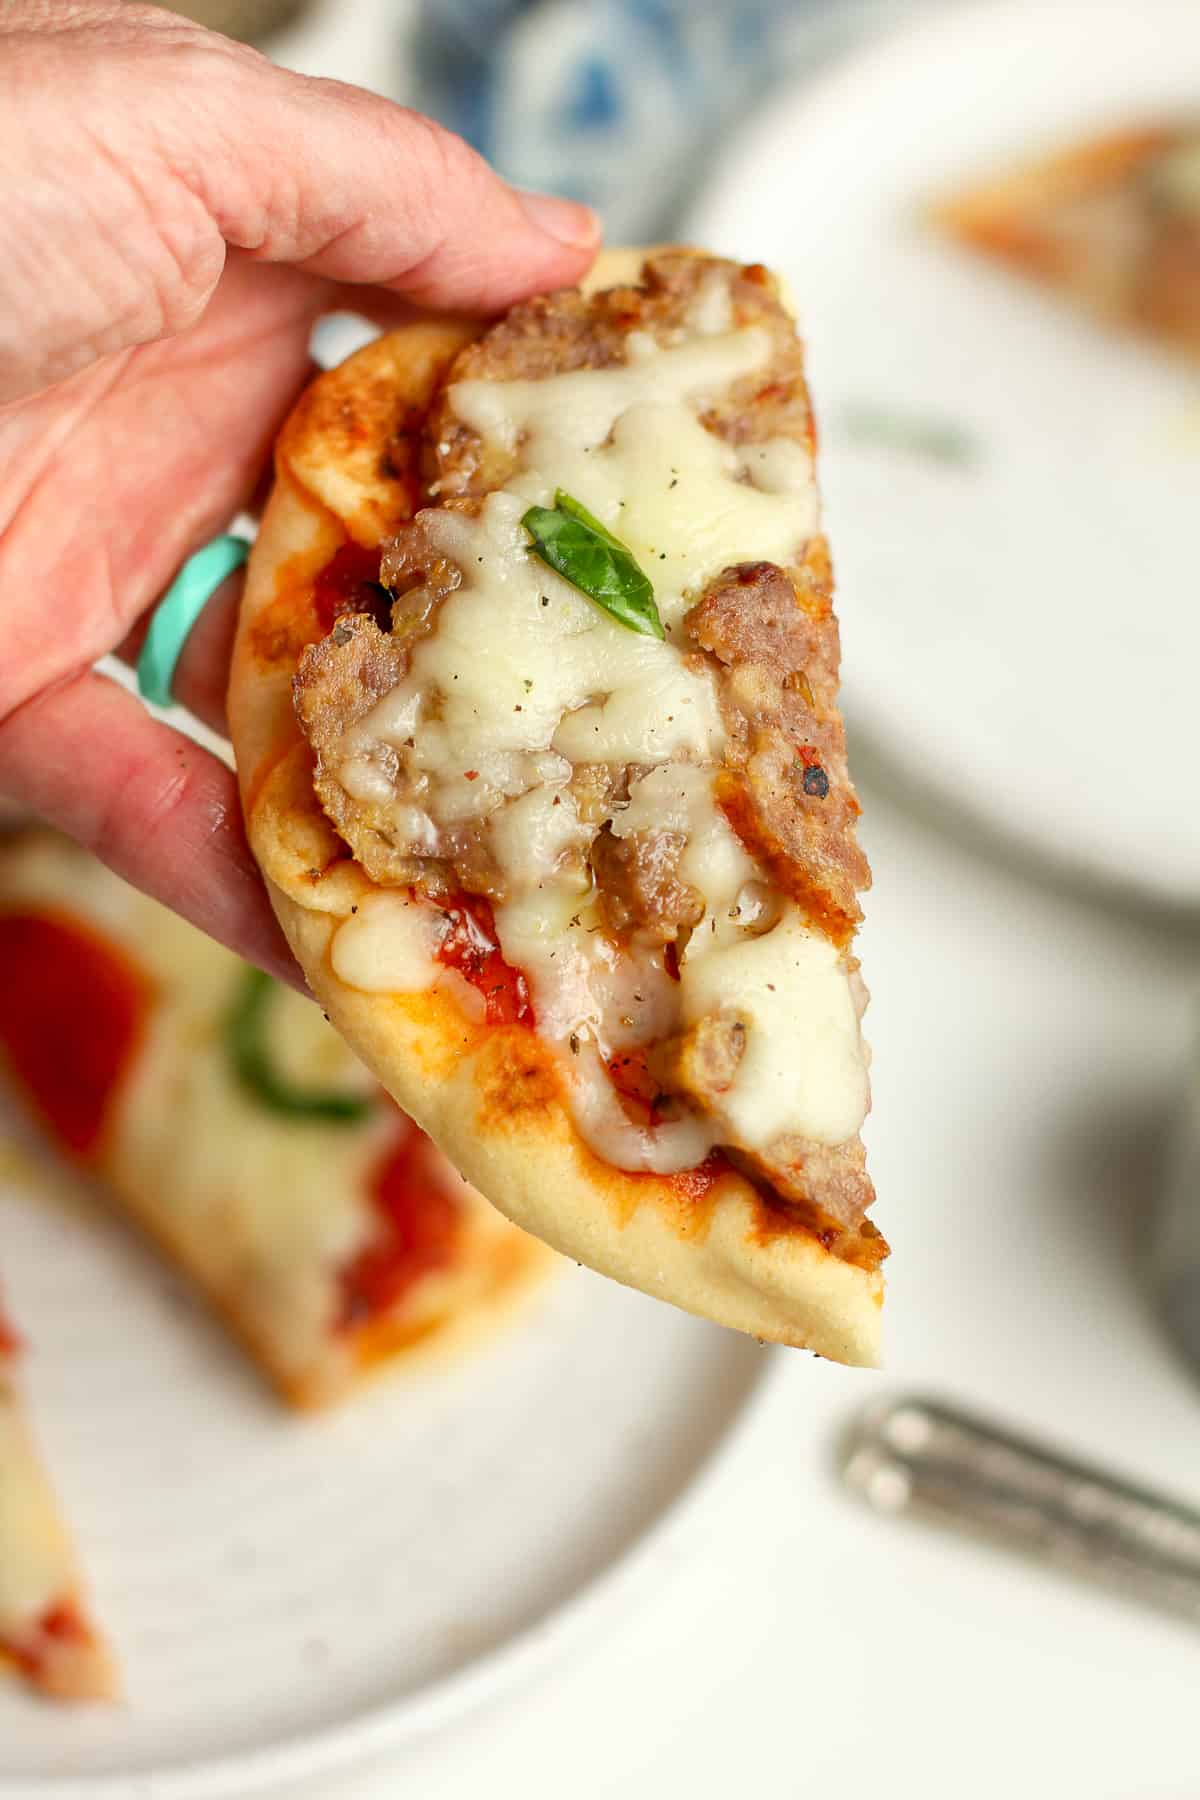 A hand holding a slice of the sausage pizza.